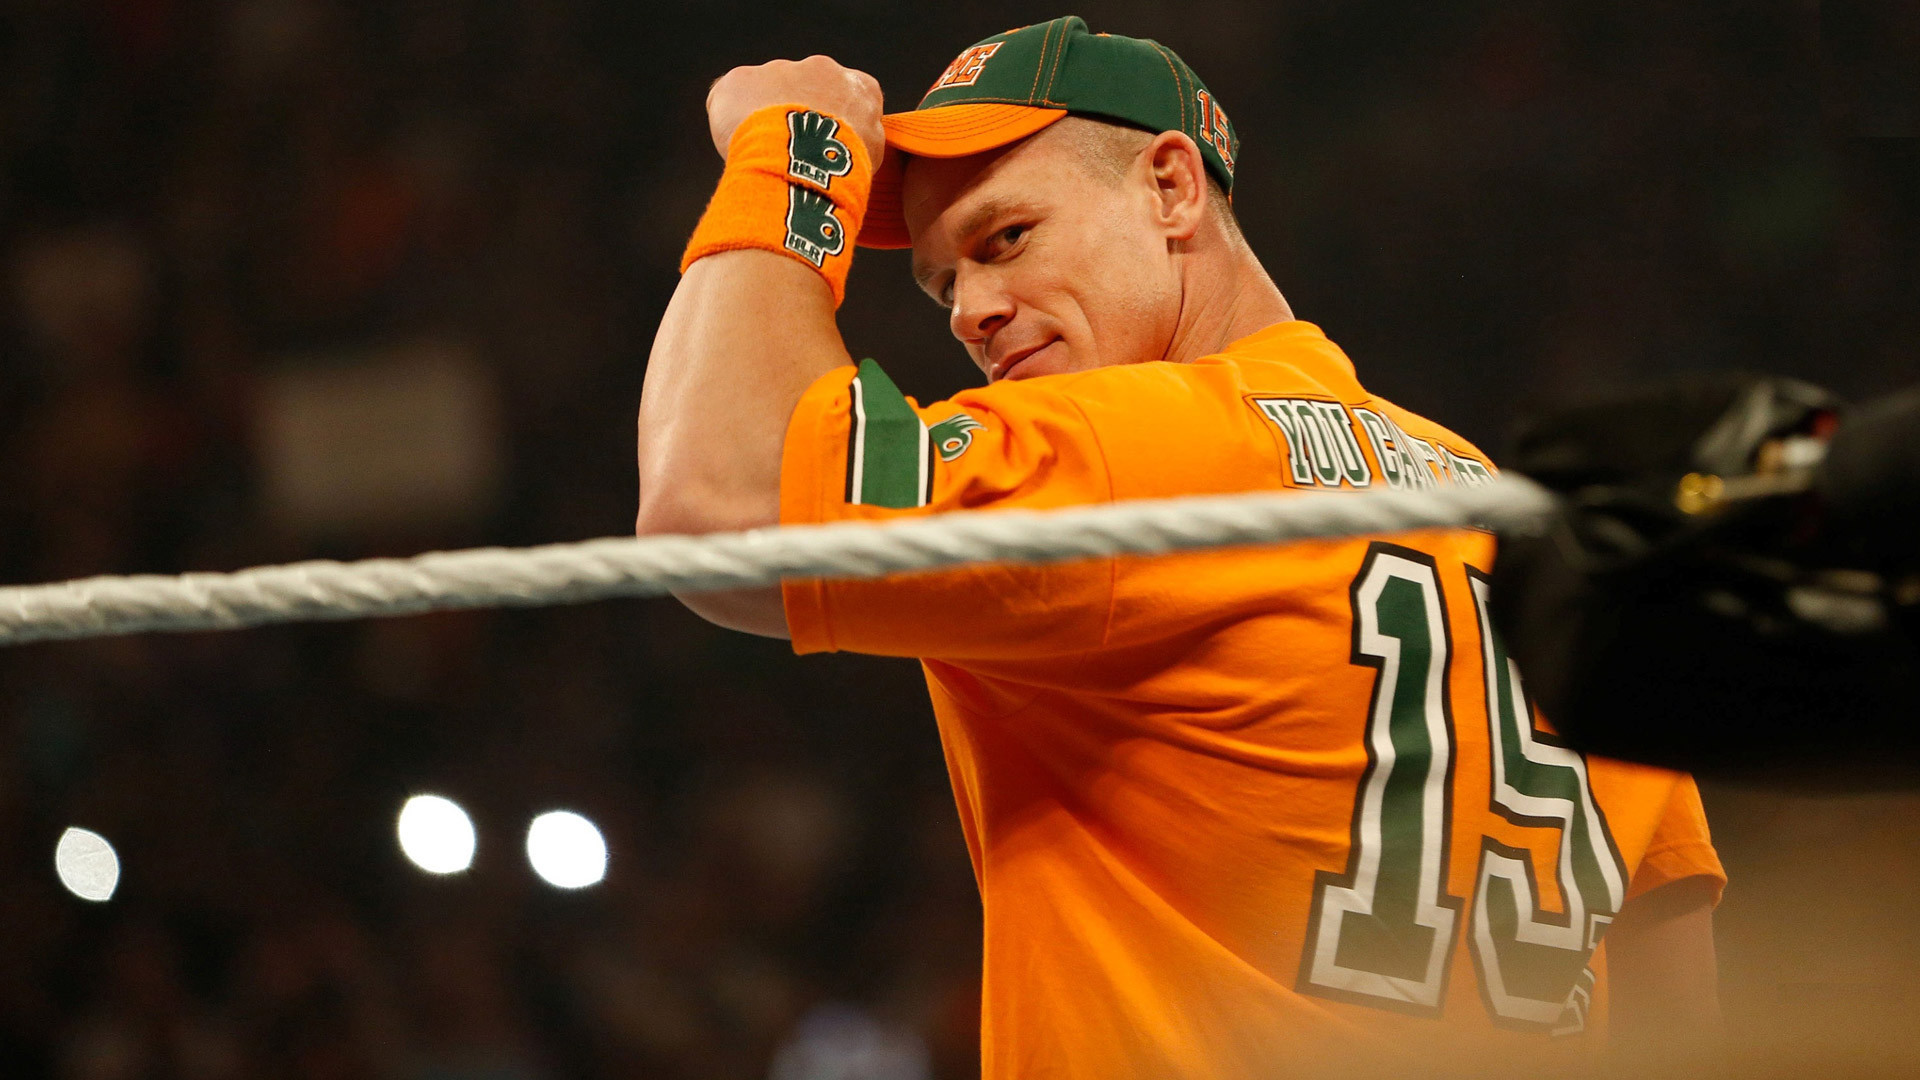 1920x1080 Best Collections of John Cena New HD Wallpapers 68+ For Desktop, Laptop and  Mobiles. Here at hdwallpaper20.com You Can Download More than Three Million  ...